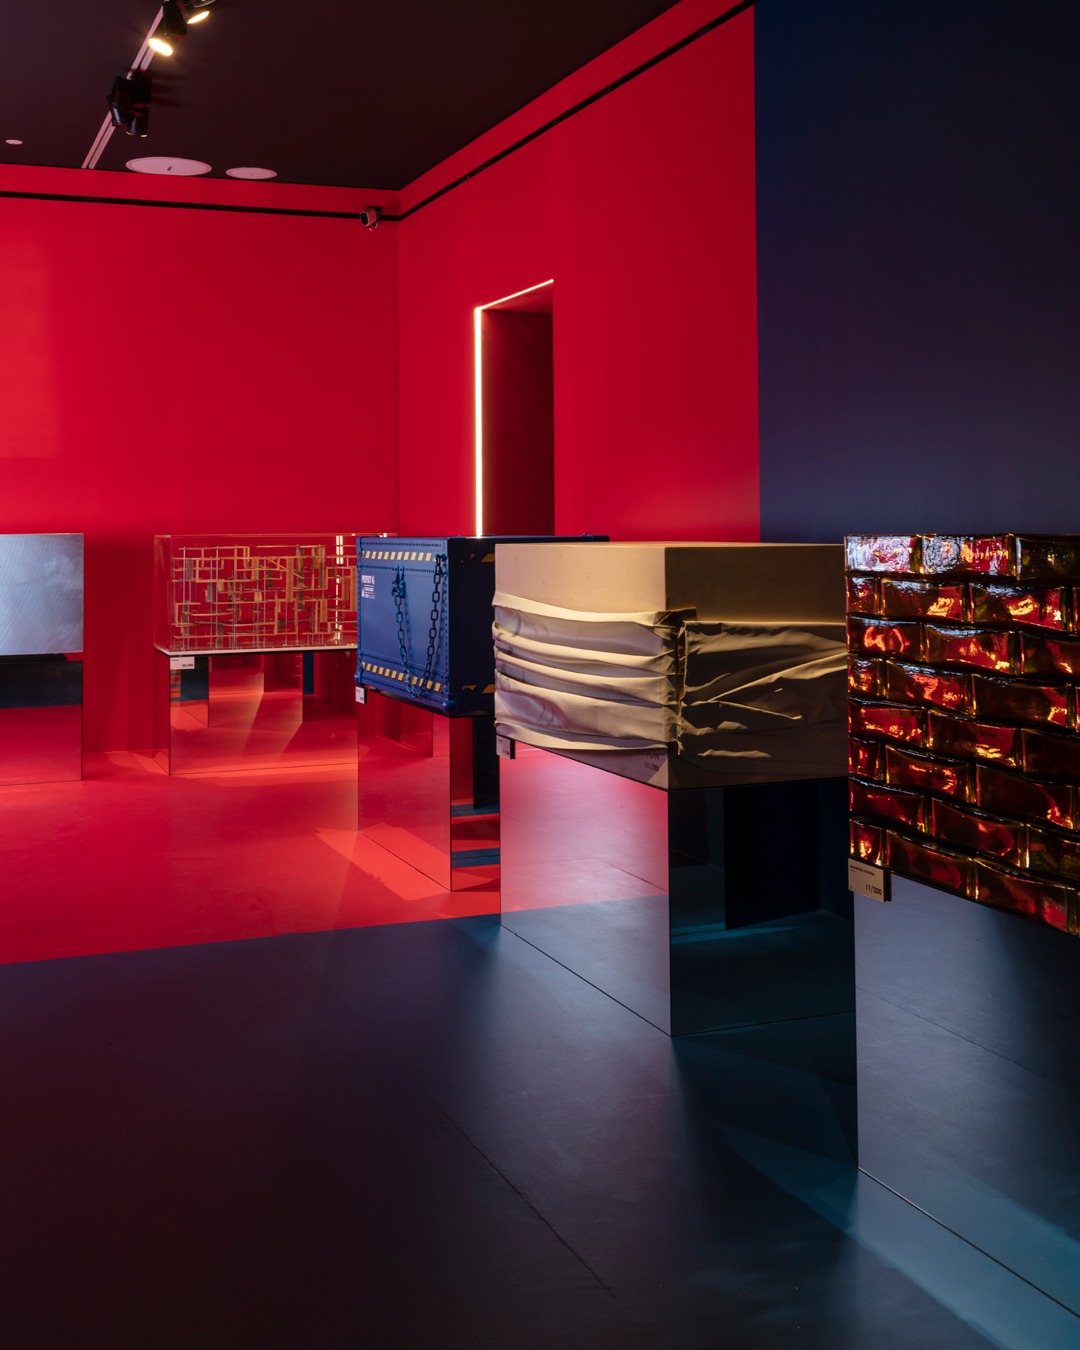 Louis Vuitton's New LA Exhibition Showcases 200 Trunks Designed by BTS,  Lego, Supreme and More